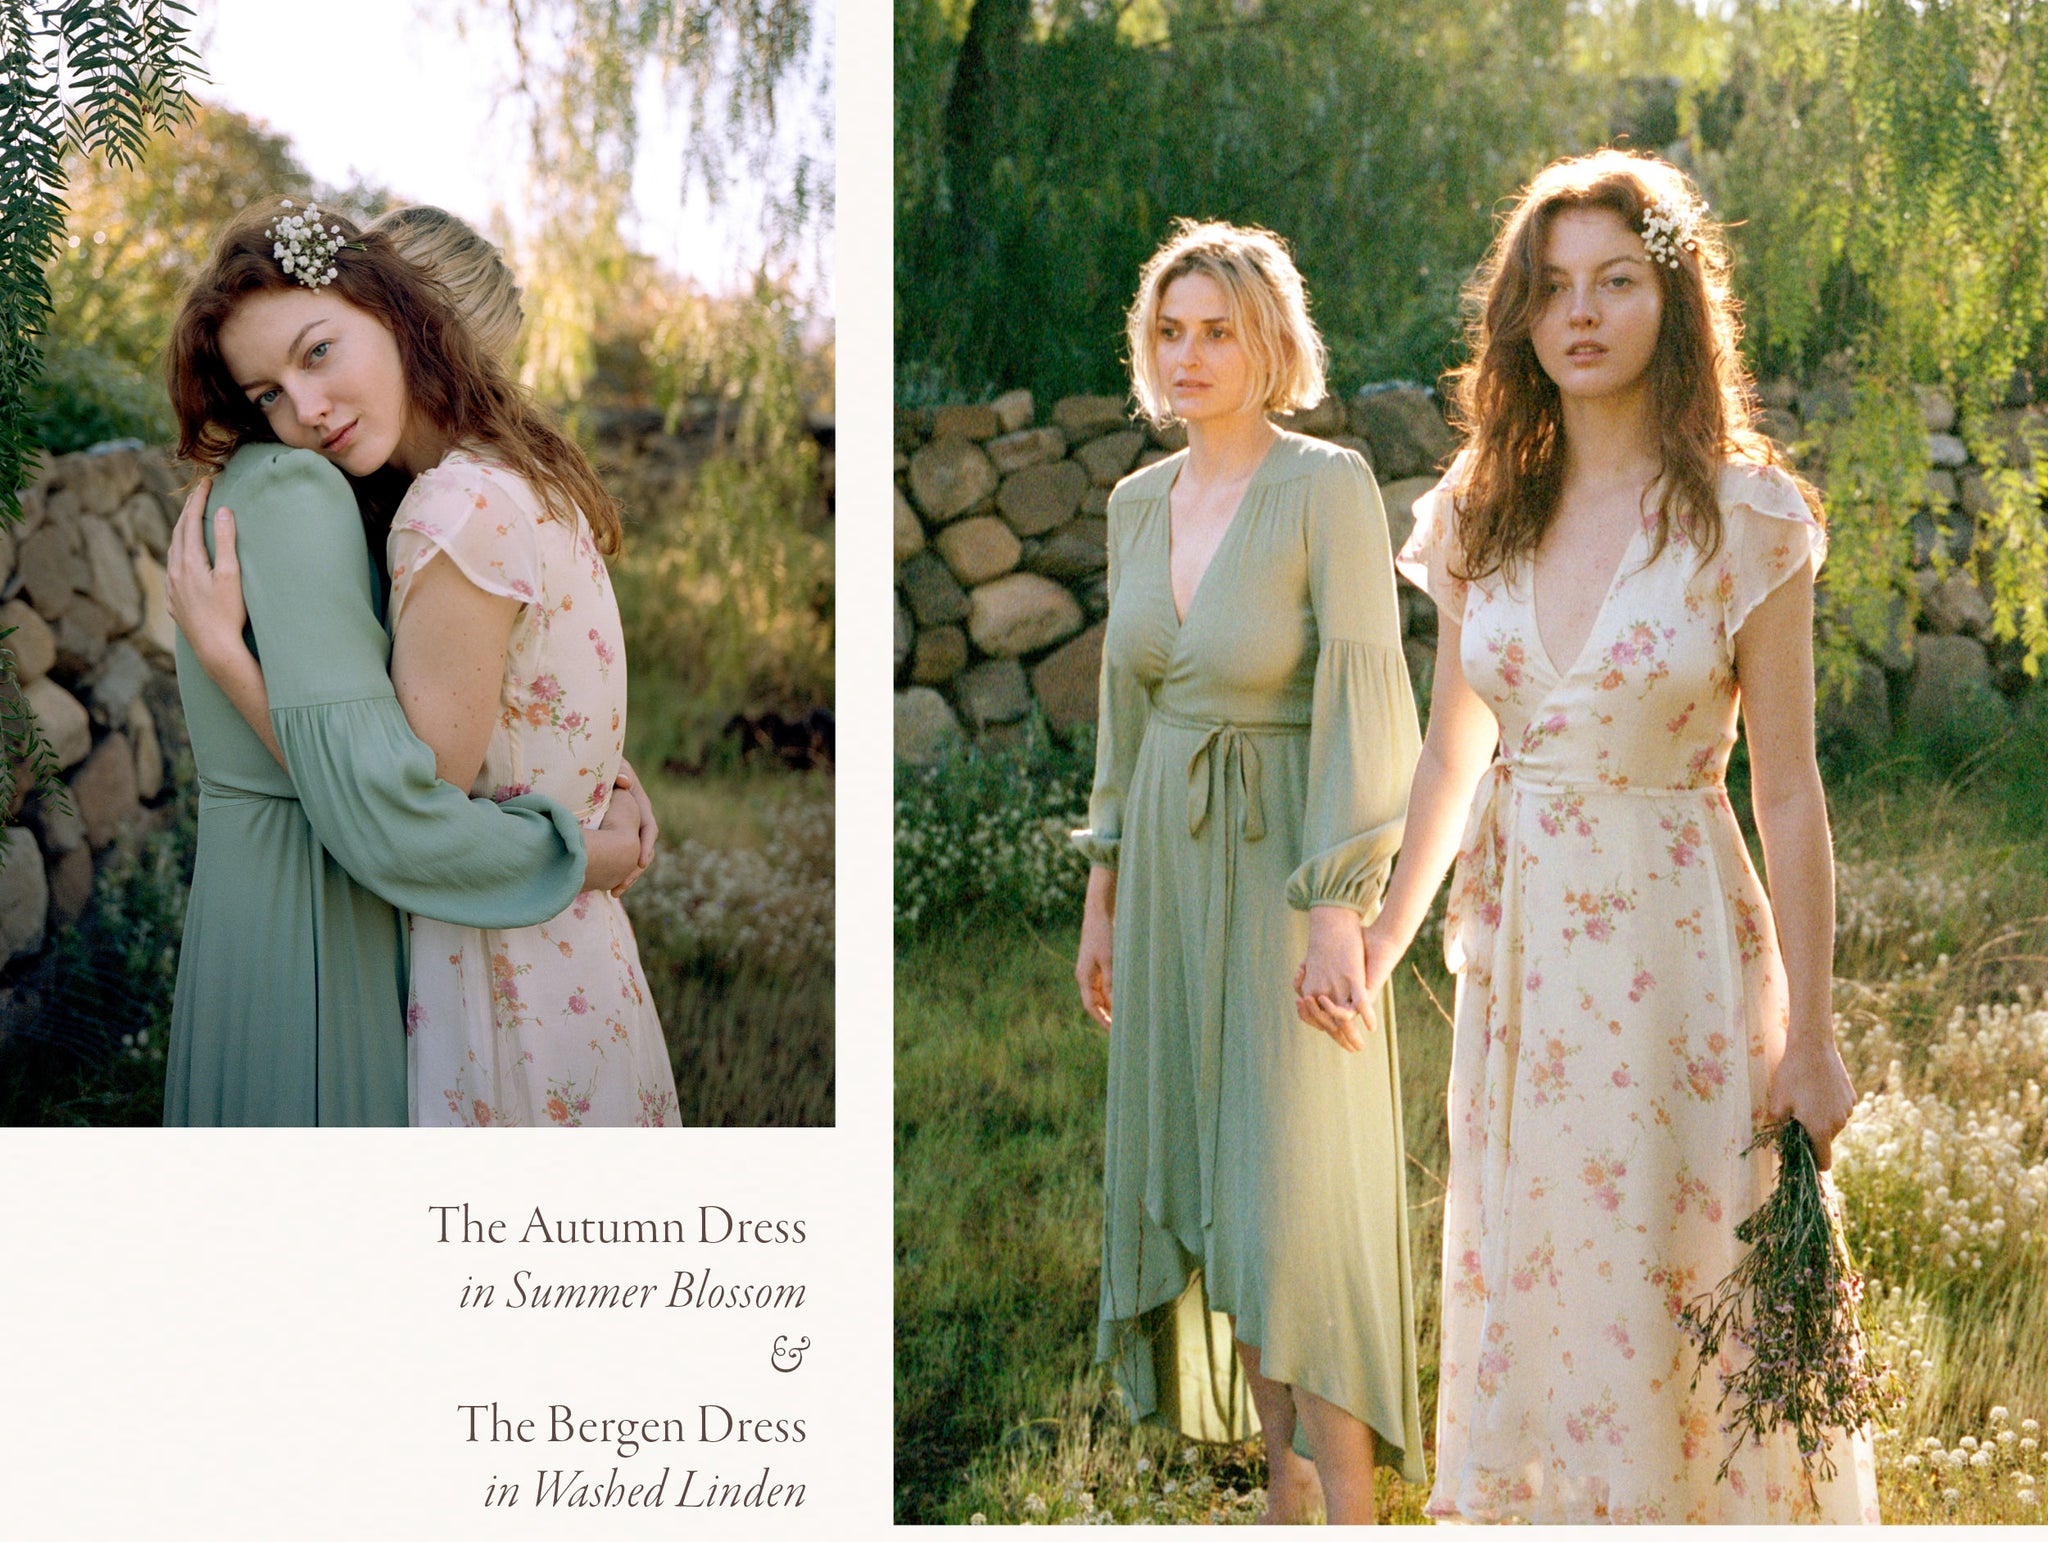 The Autumn Dress in Summer Blossom & The Bergen Dress in Washed Linden